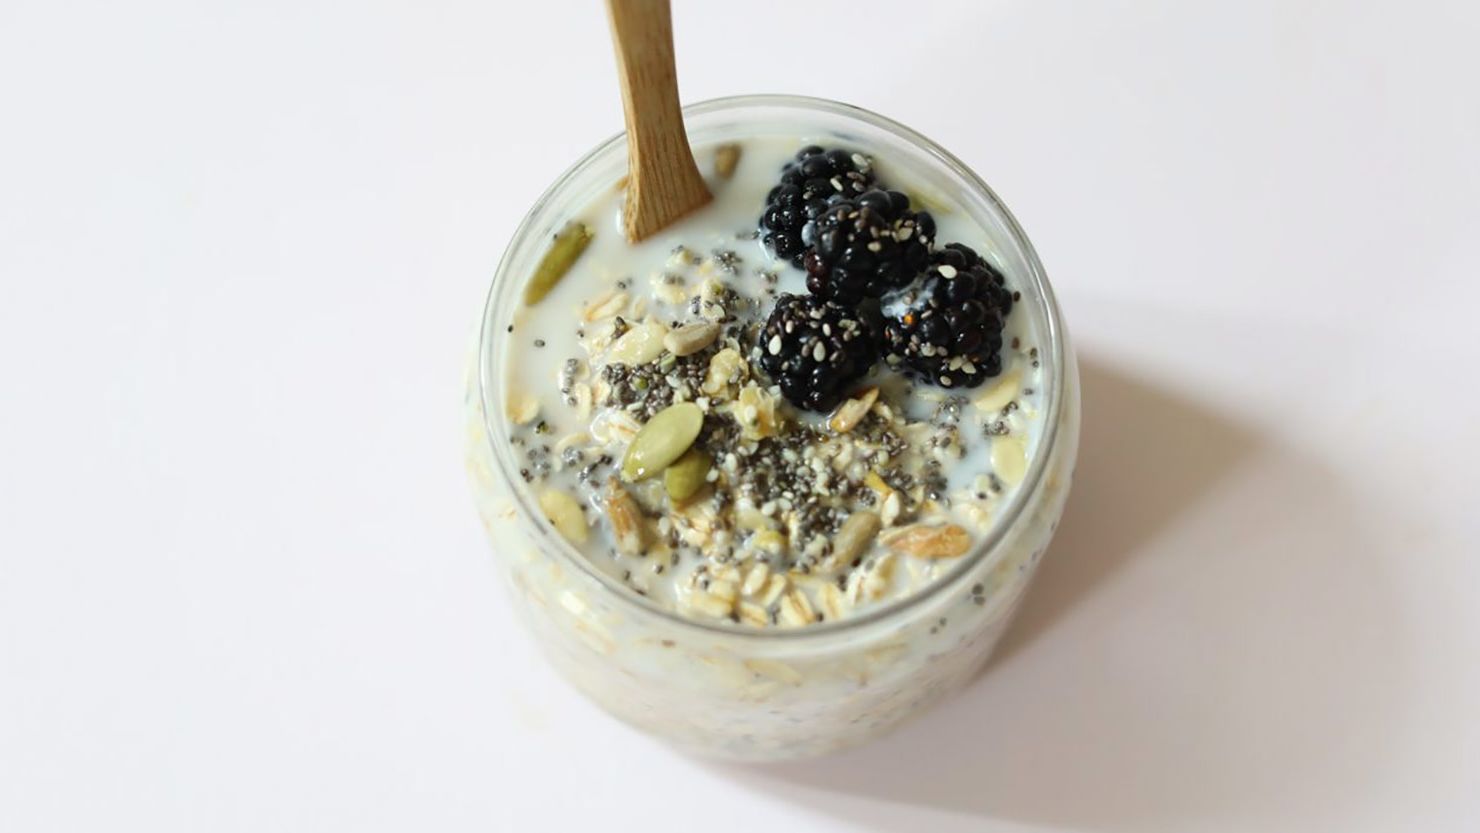 Kooienga's Overnight Chia Oat Bowl is rich with whole foods that can reward long-lasting energy.